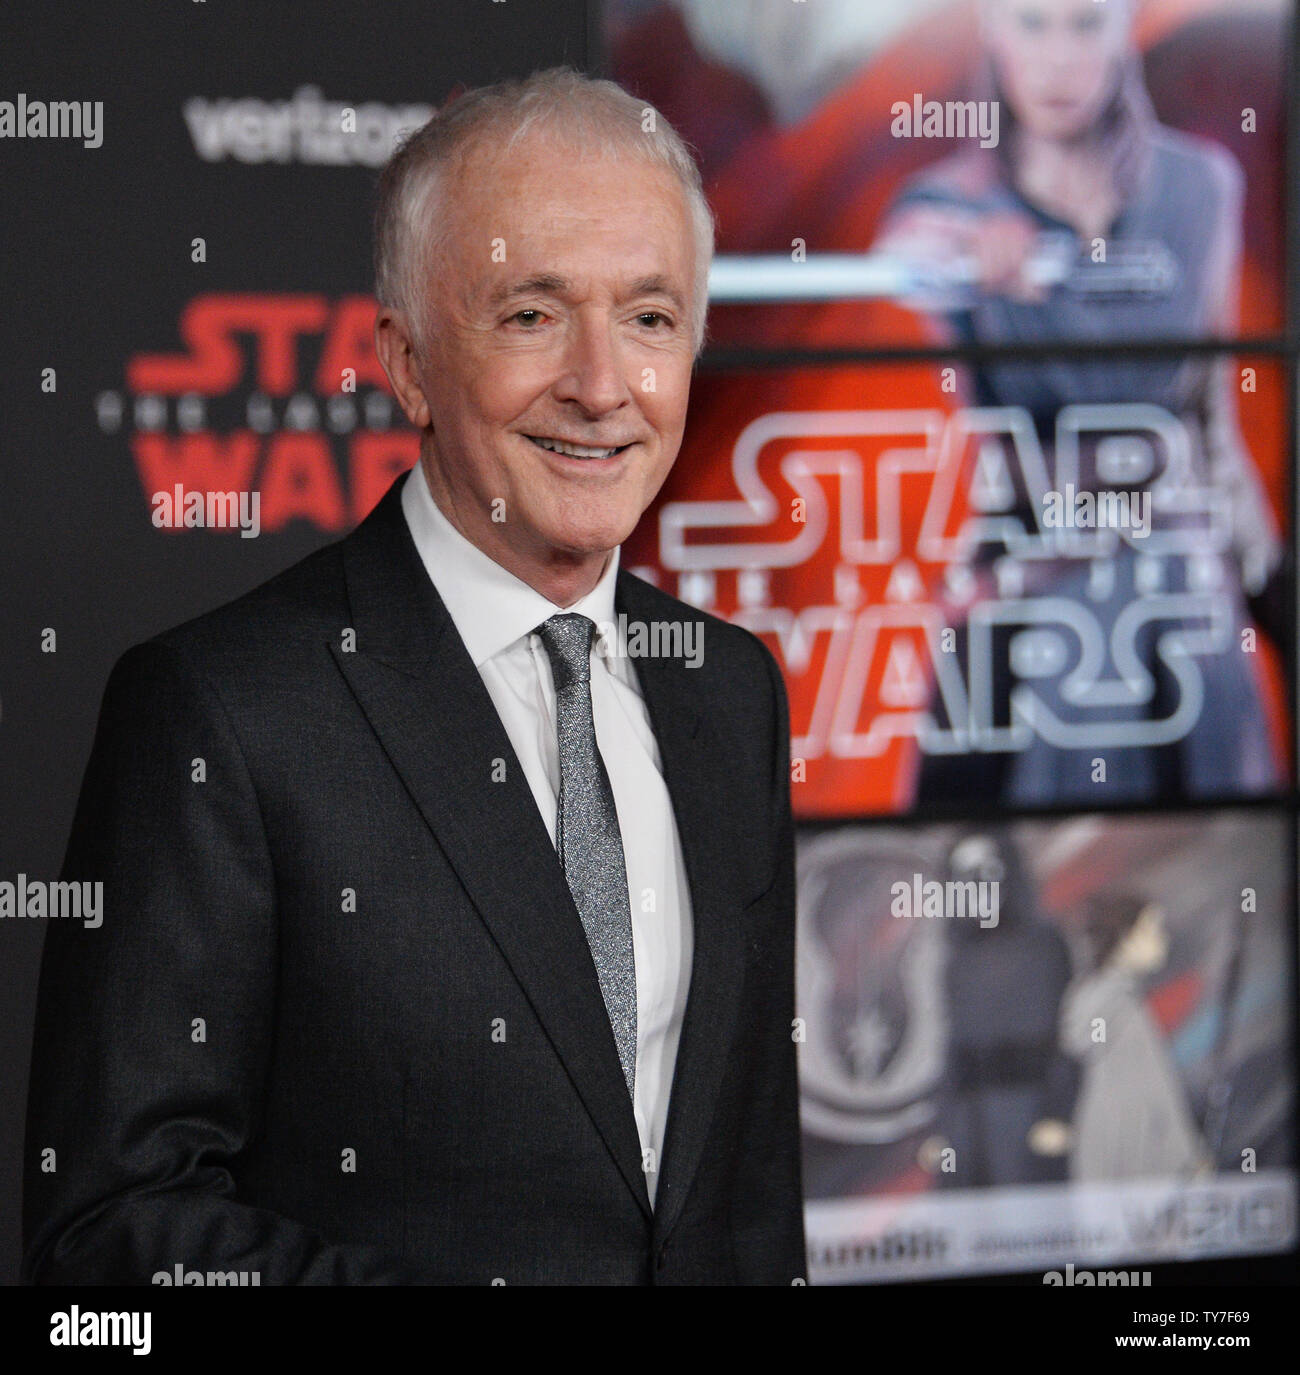 Cast member Anthony Daniels attends the premiere of the sci-fi motion picture fantasy 'Star Wars: The Last Jedi' at the Shrine Auditorium in Los Angeles on December 9, 2017. Storyline: Having taken her first steps into the Jedi world, Rey joins Luke Skywalker on an adventure with Leia, Finn and Poe that unlocks mysteries of the Force and secrets of the past.  Photo by Jim Ruymen/UPI Stock Photo